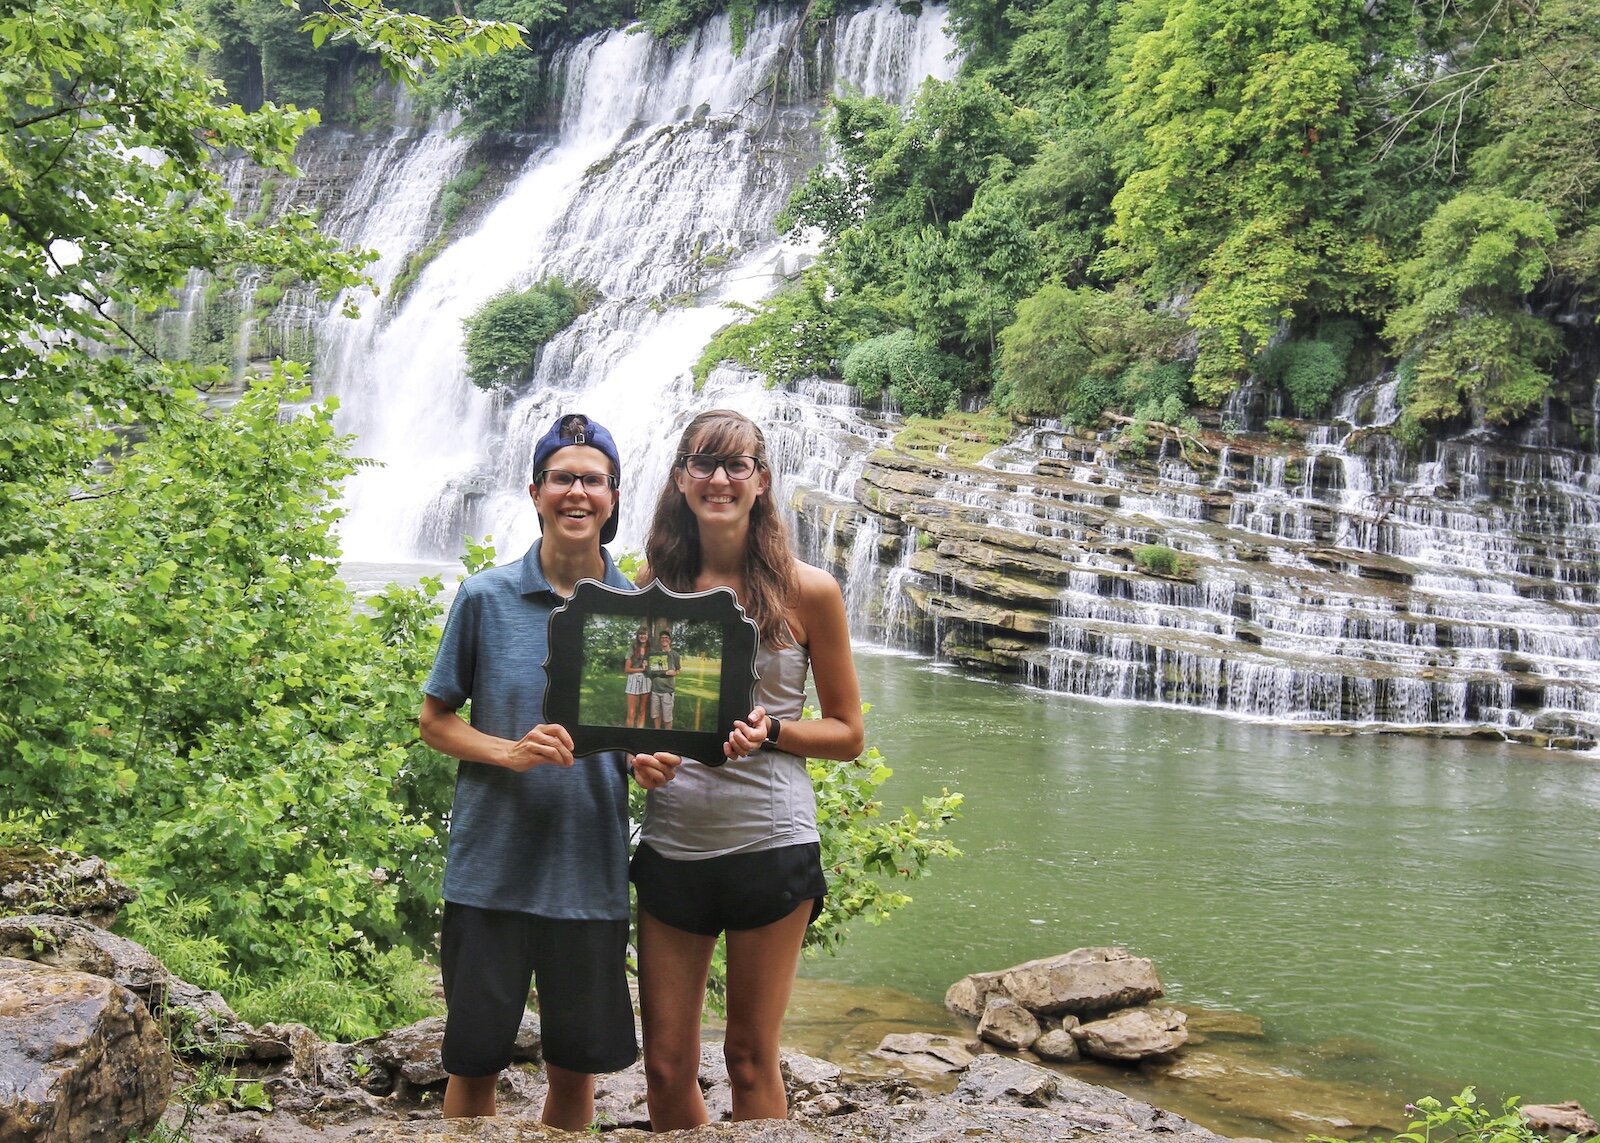 Alexys and Erica Esslinger pose in Rock Island State Park in Tennessee for their annual anniversary photo.